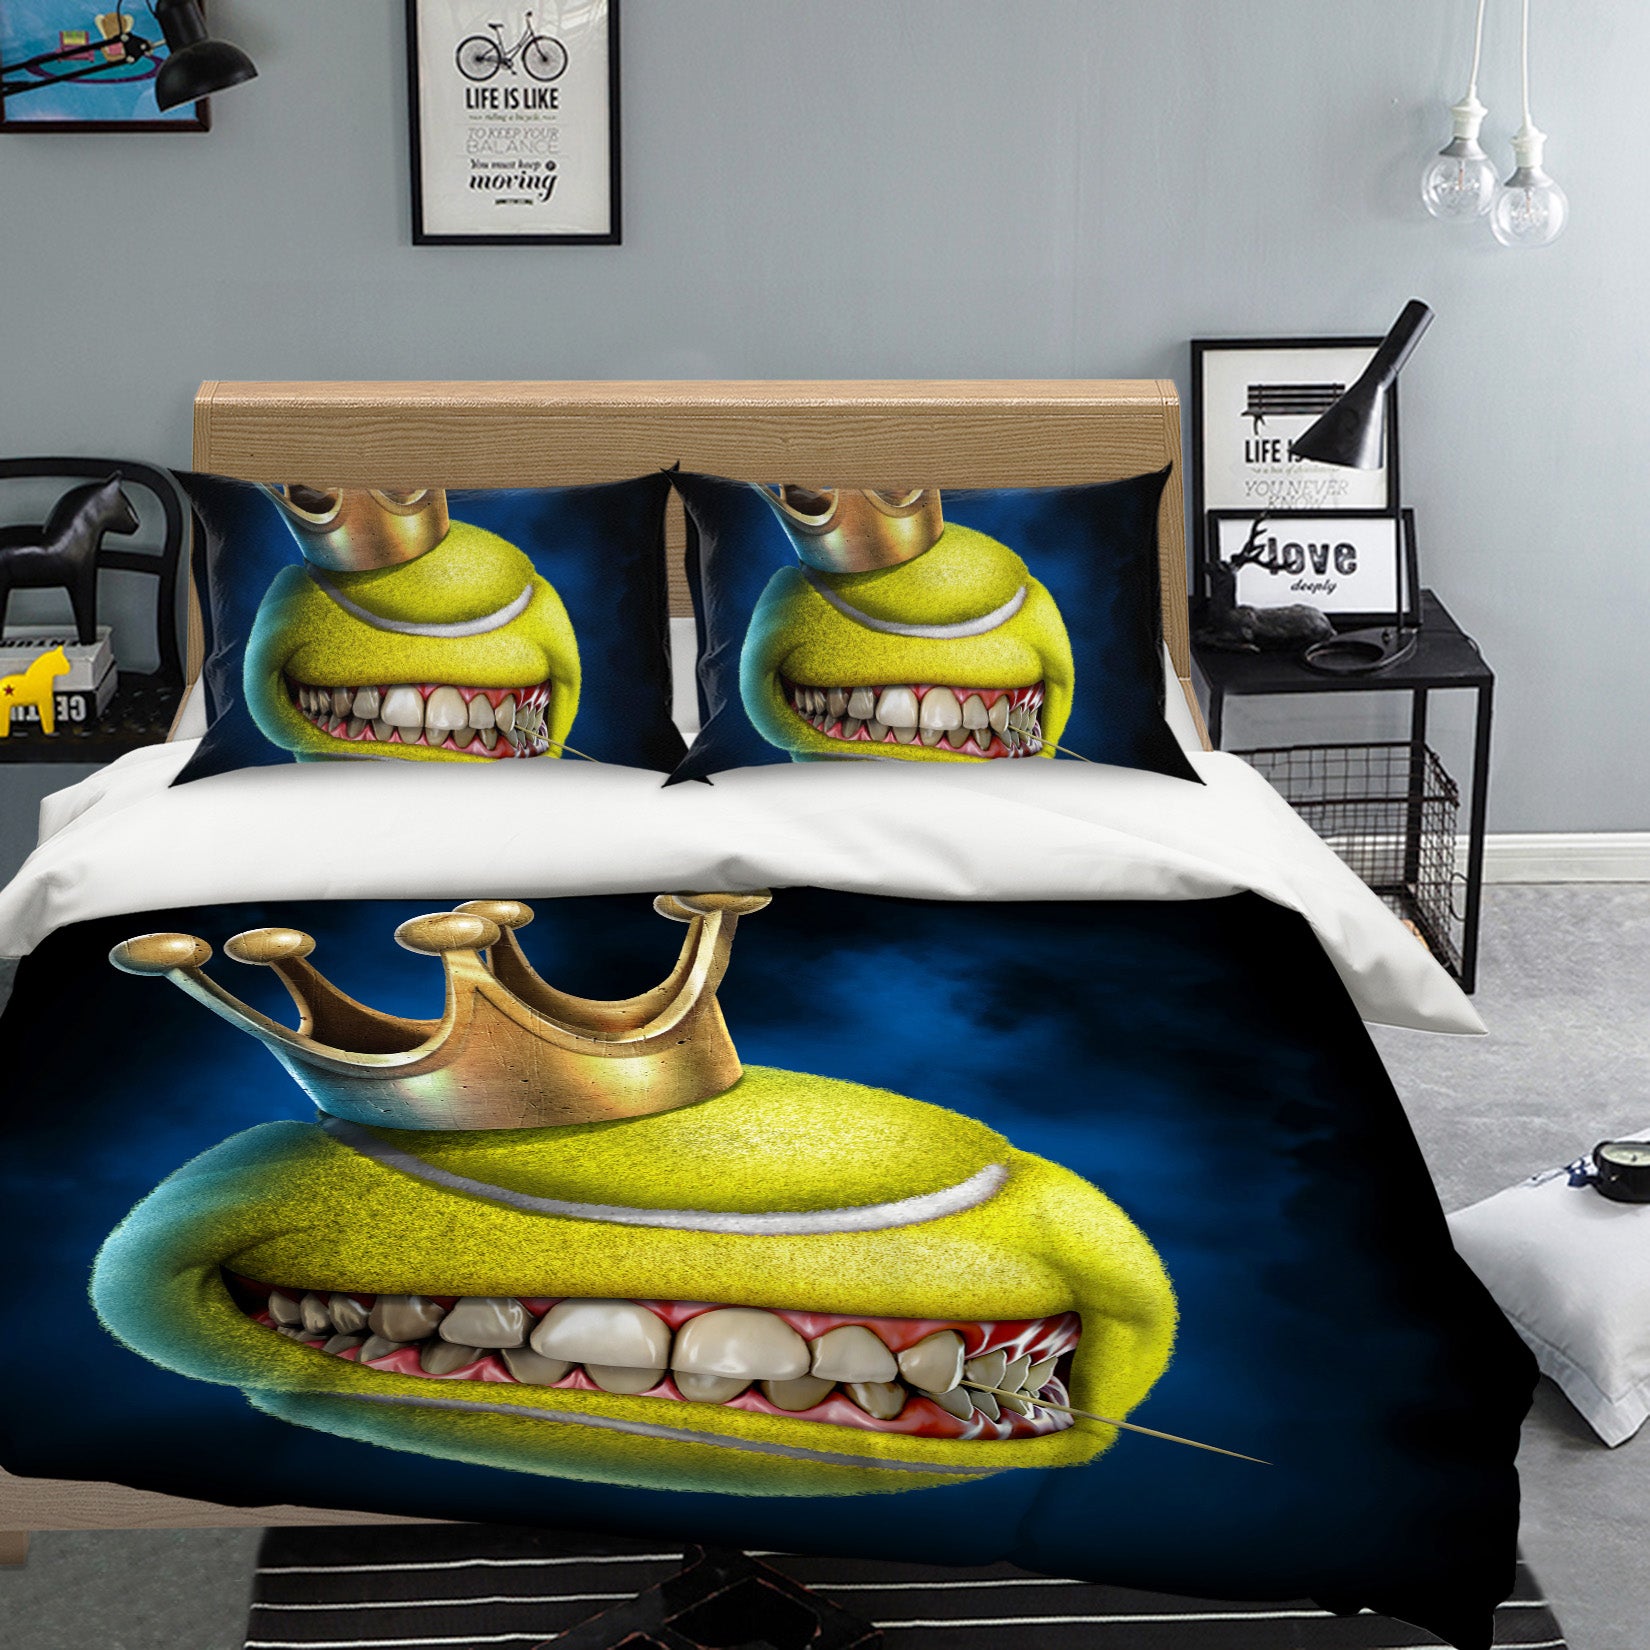 3D Tennis Tooth Crown 4054 Tom Wood Bedding Bed Pillowcases Quilt